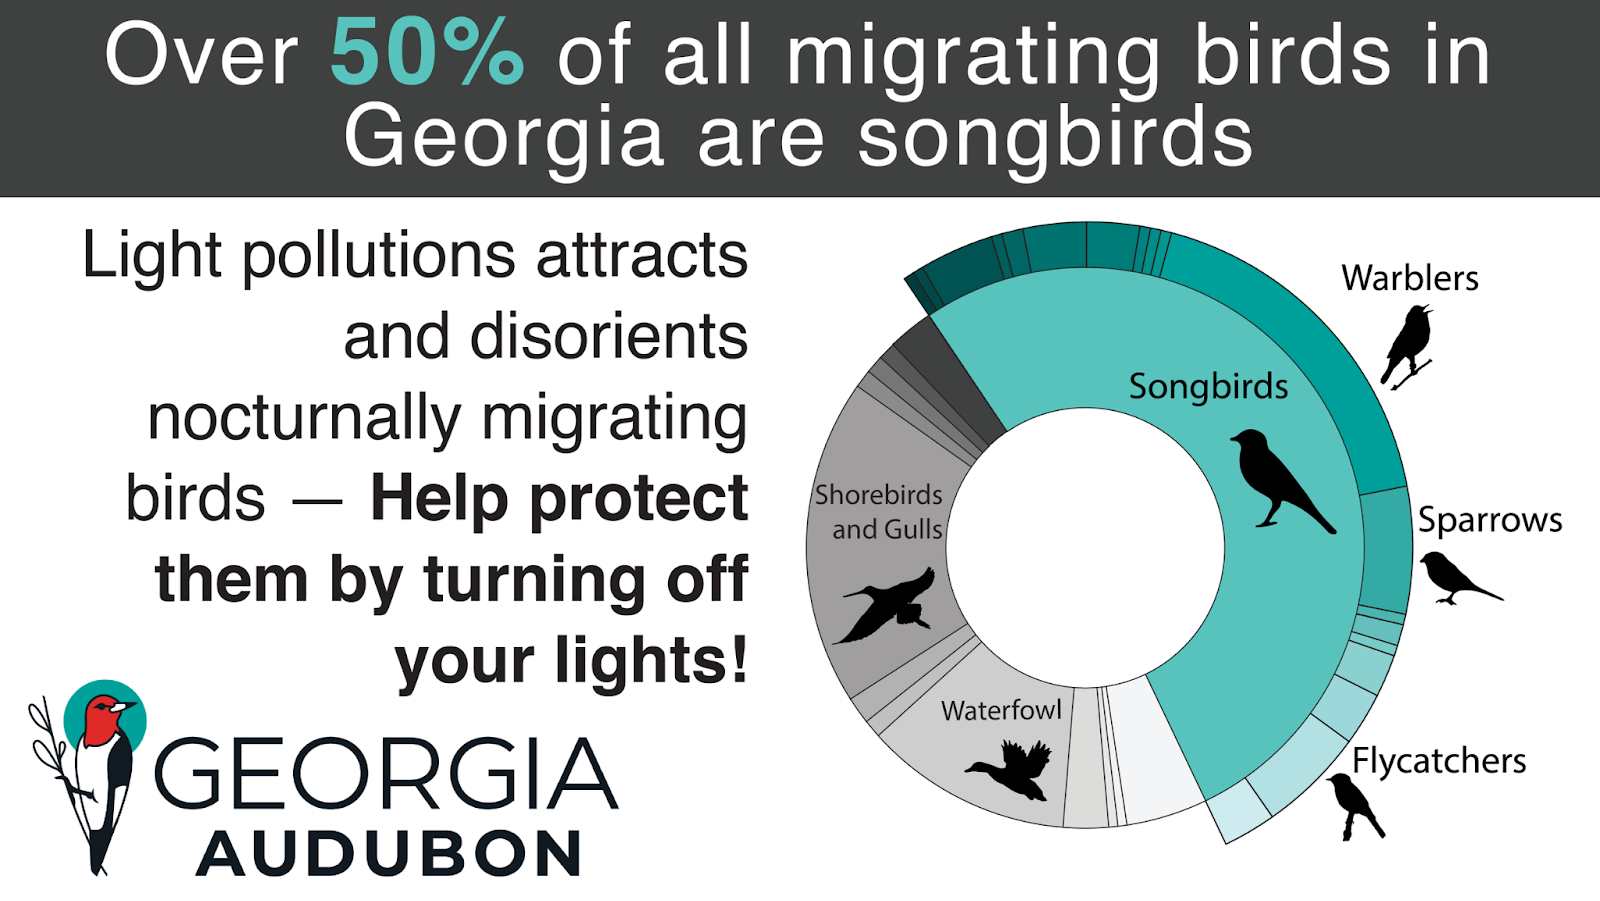 Georgia Audubon graphic indicating that over 50% of all migrating birds in Georgia are songbirds. Light pollution attracts and disorients nocturnally migraing birds -- help protect them by turnig off yur lights!